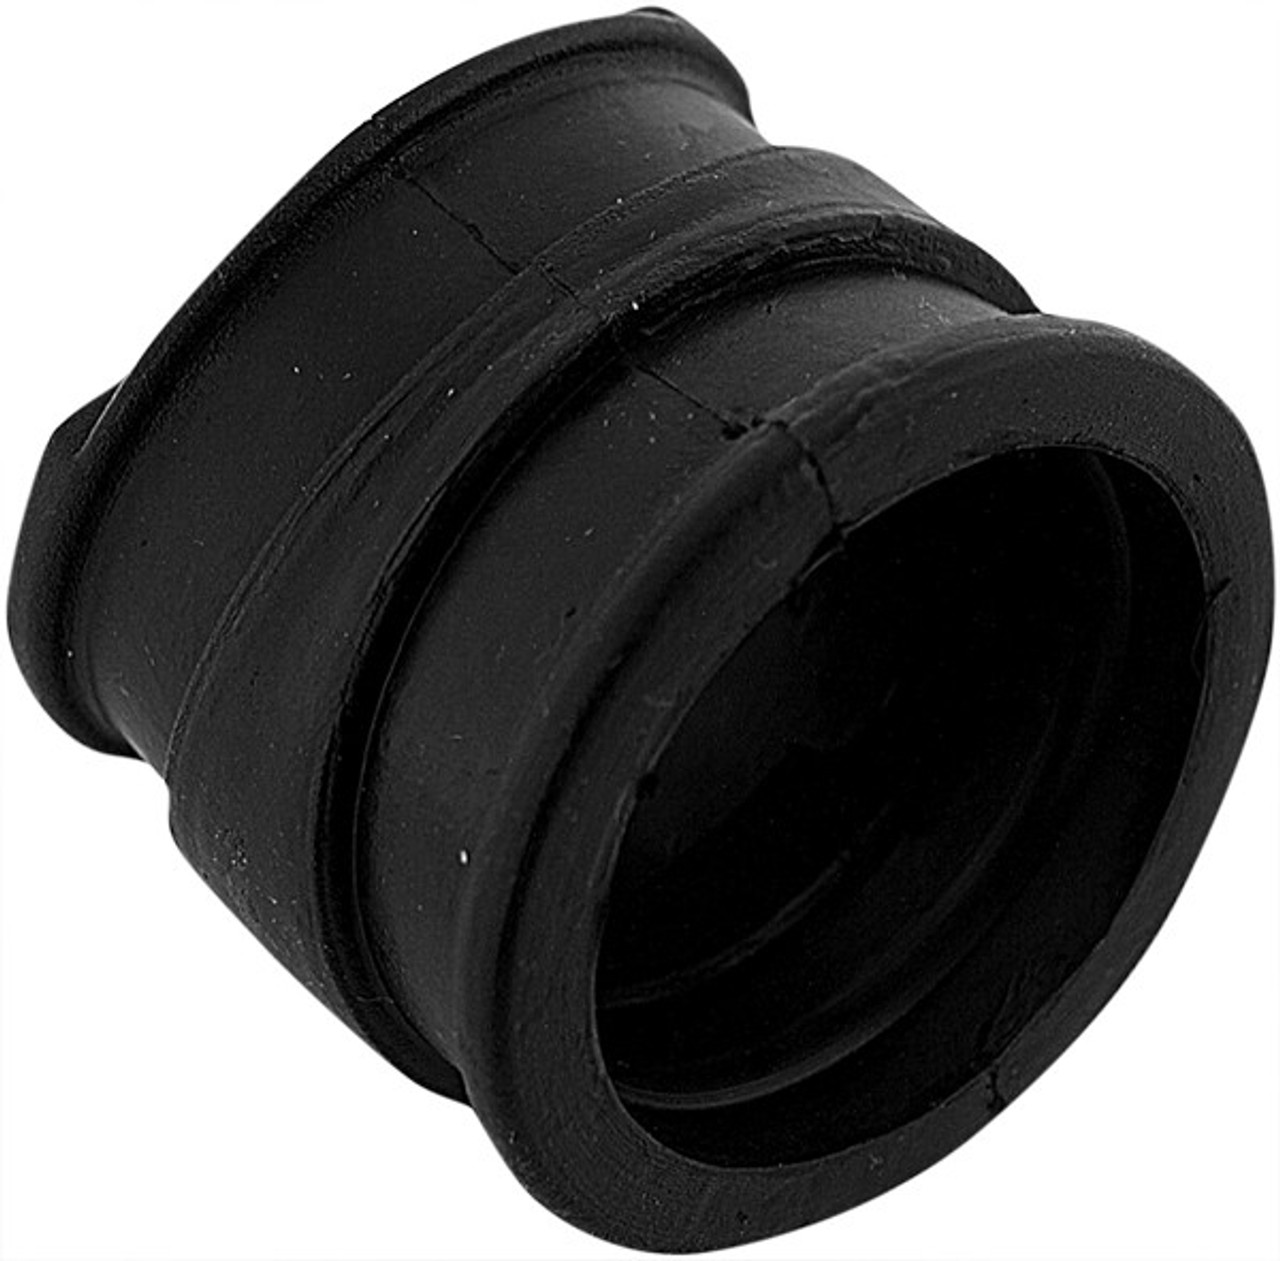 Replacement Intake Mounting Flange compatible with Ski Doo Part# 12-1475 OEM# 570-1262-00